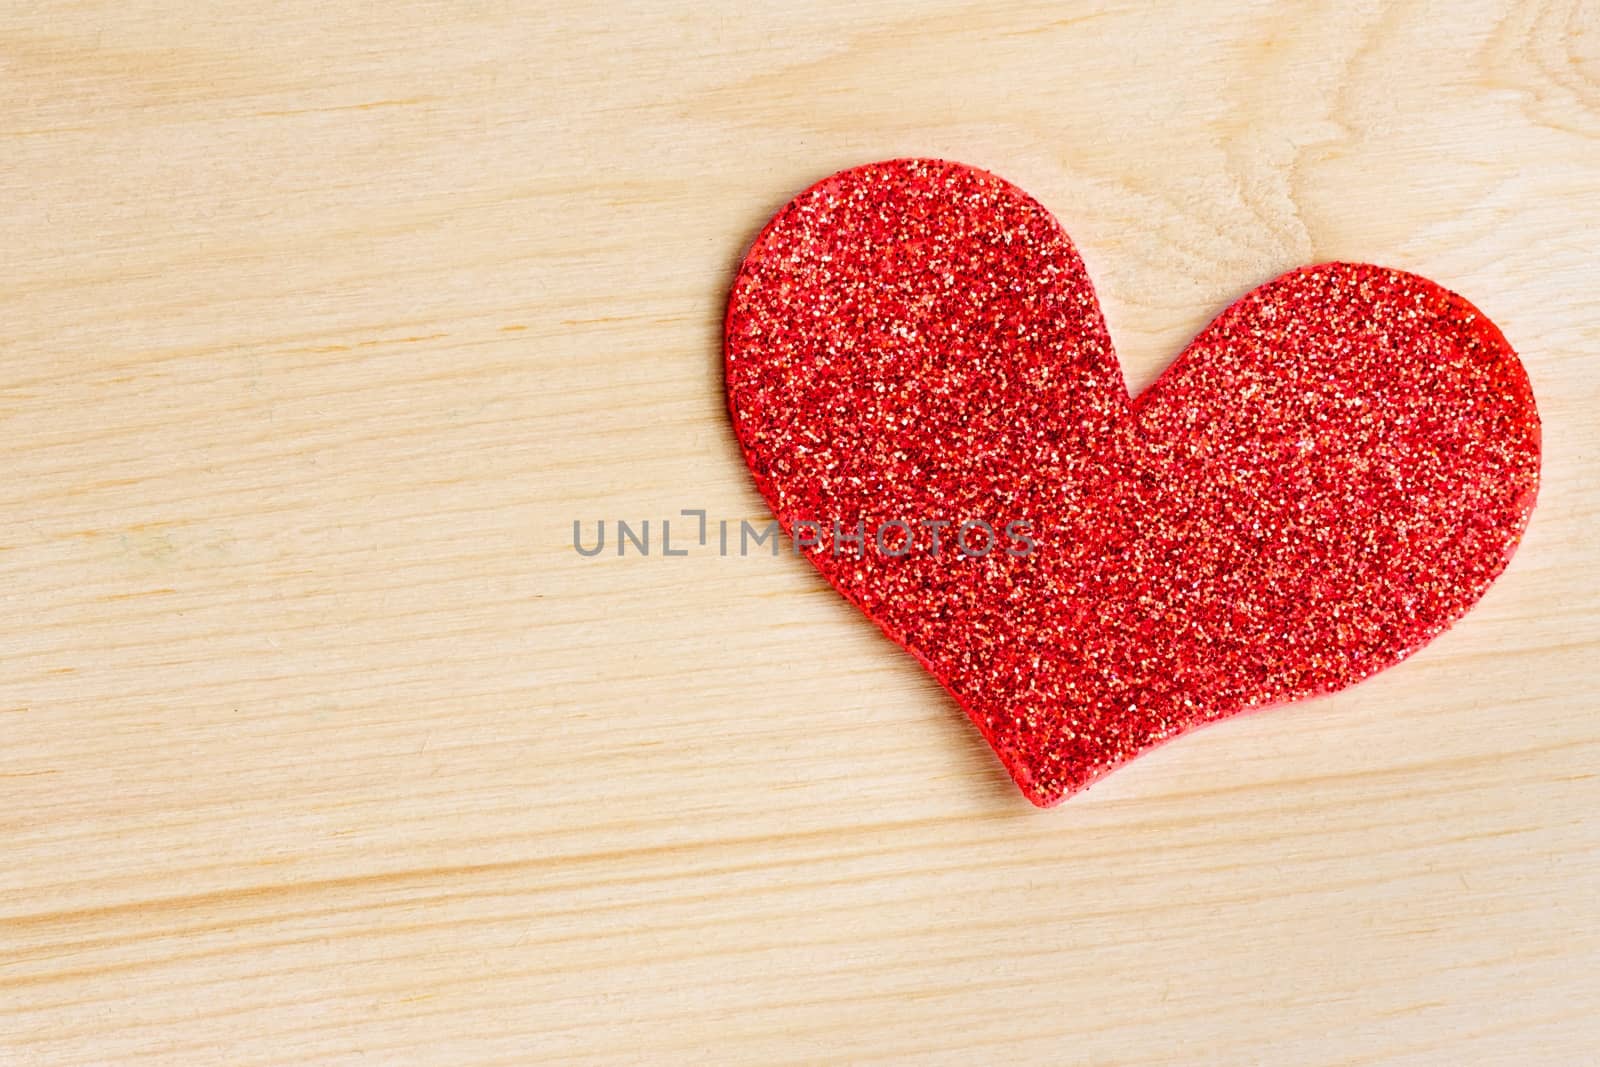 one decorative red heart on wood background, concept of love by donfiore